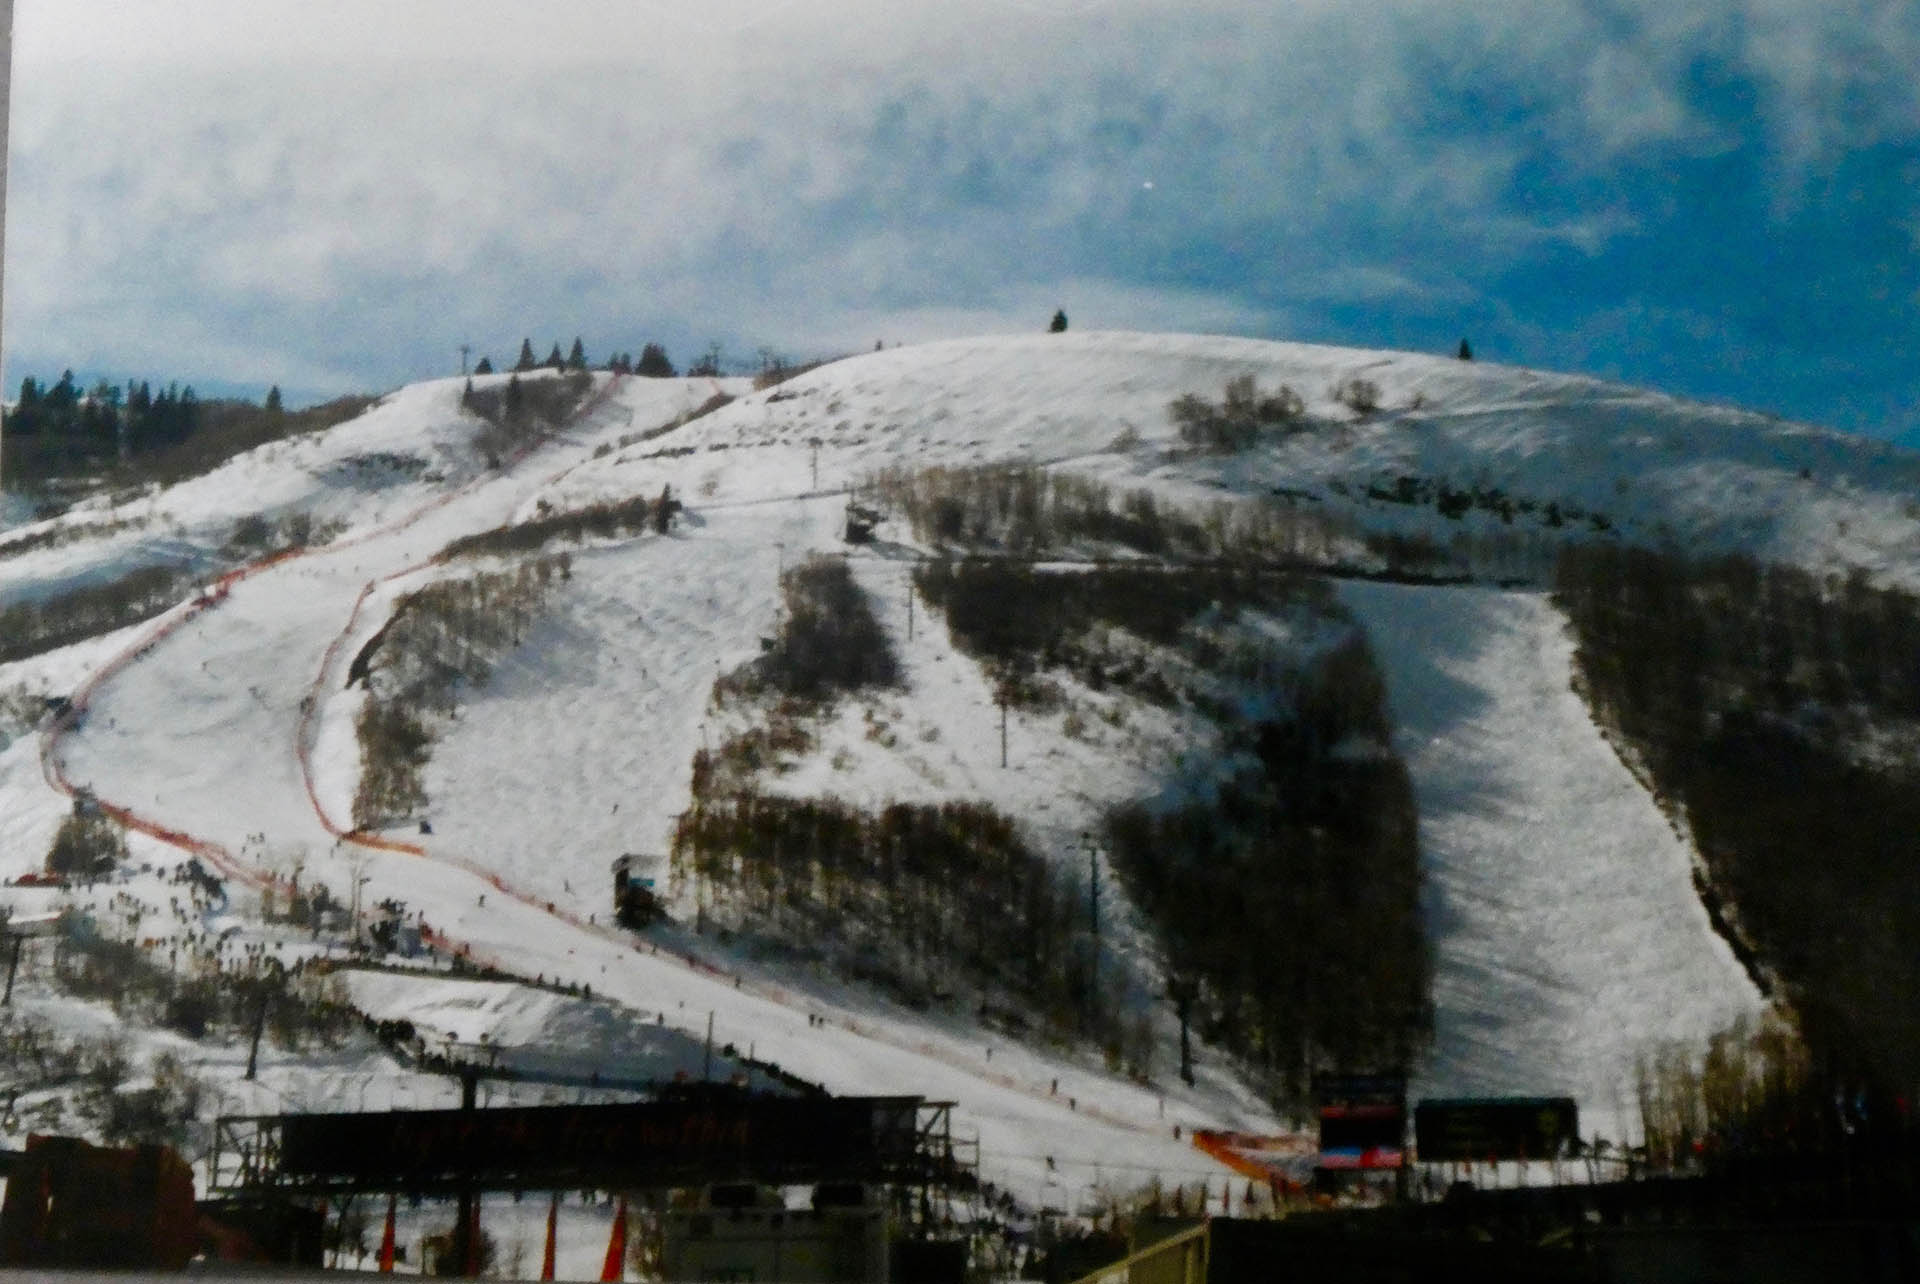 Race day at Park City Mountain Resort (Brian PInelli)